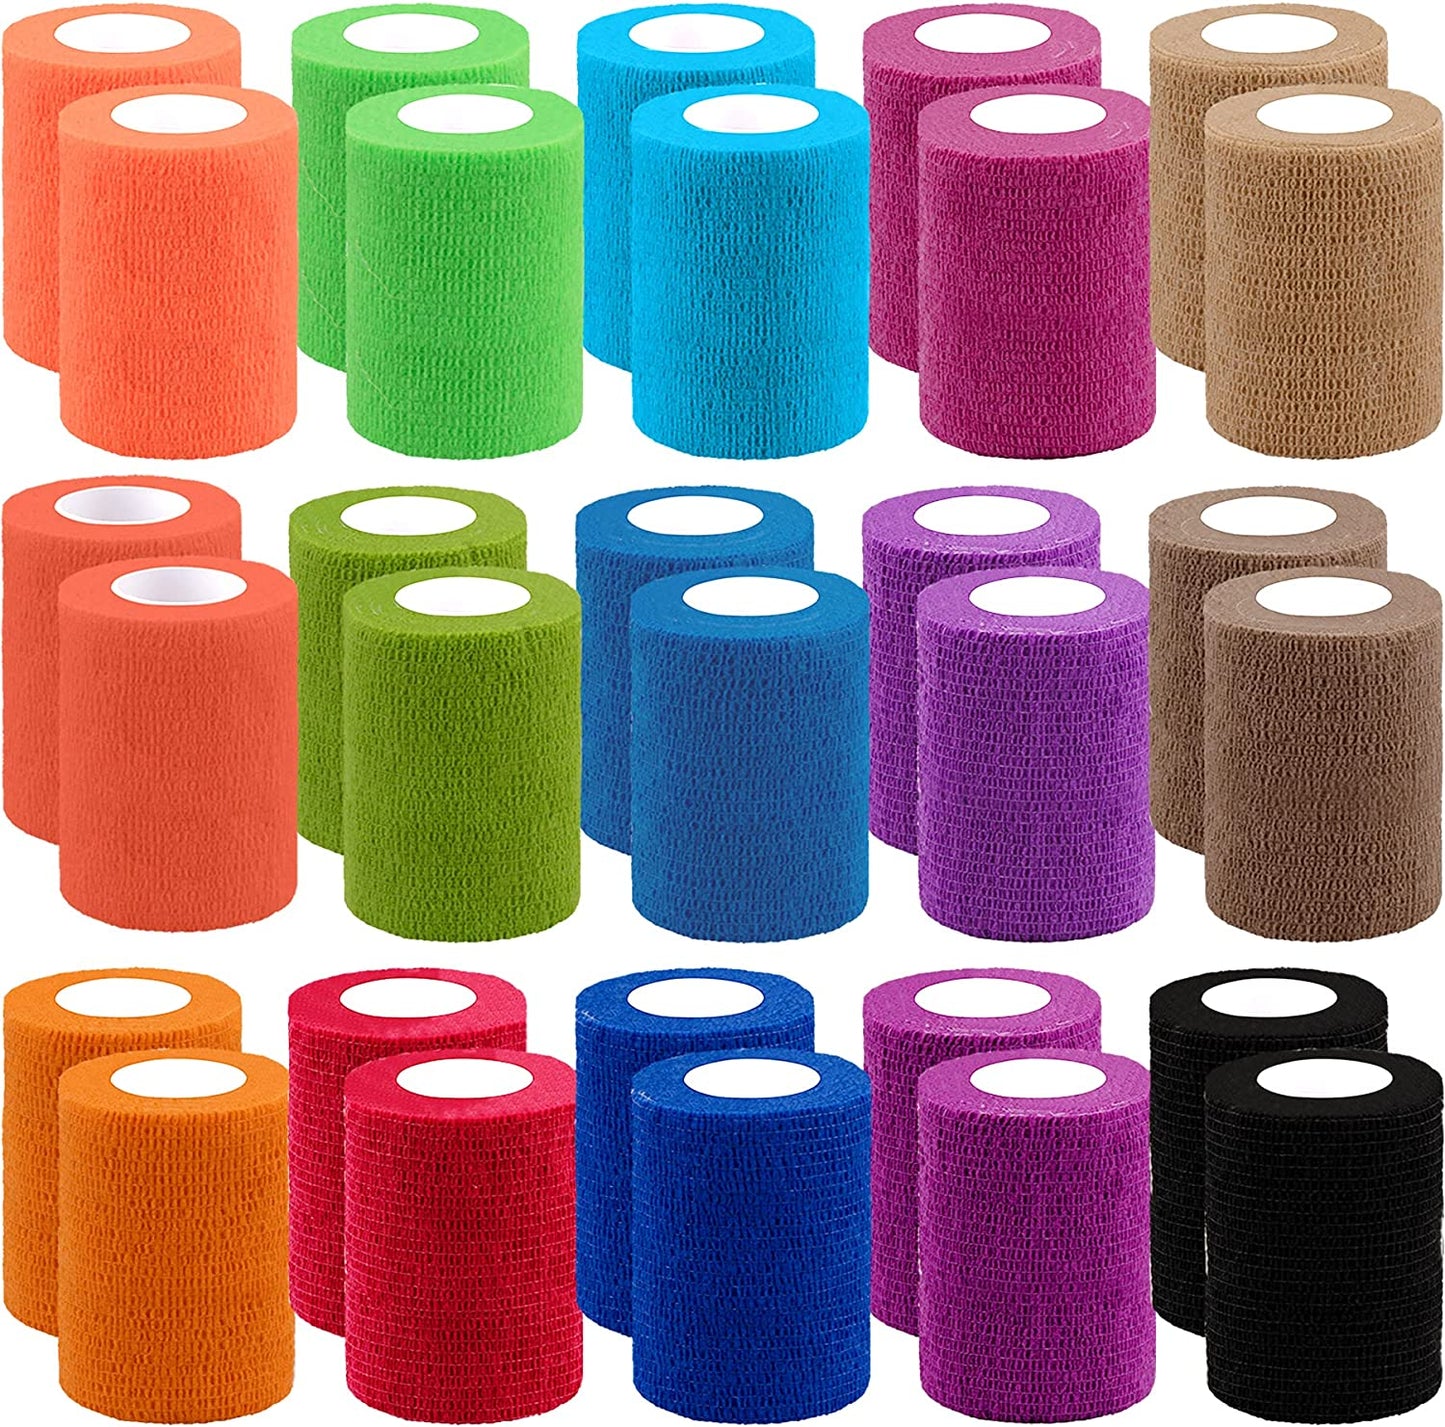 30 Rolls Self Adherent Wrap 1 Inch Bandage Adhesive Wrap Breathable Athletic Tape Stretch Wrap Roll Sports Wrap Tape Self Adhesive Bandage Wrap for Wrist Ankle Swelling Sprains(30 Colors)